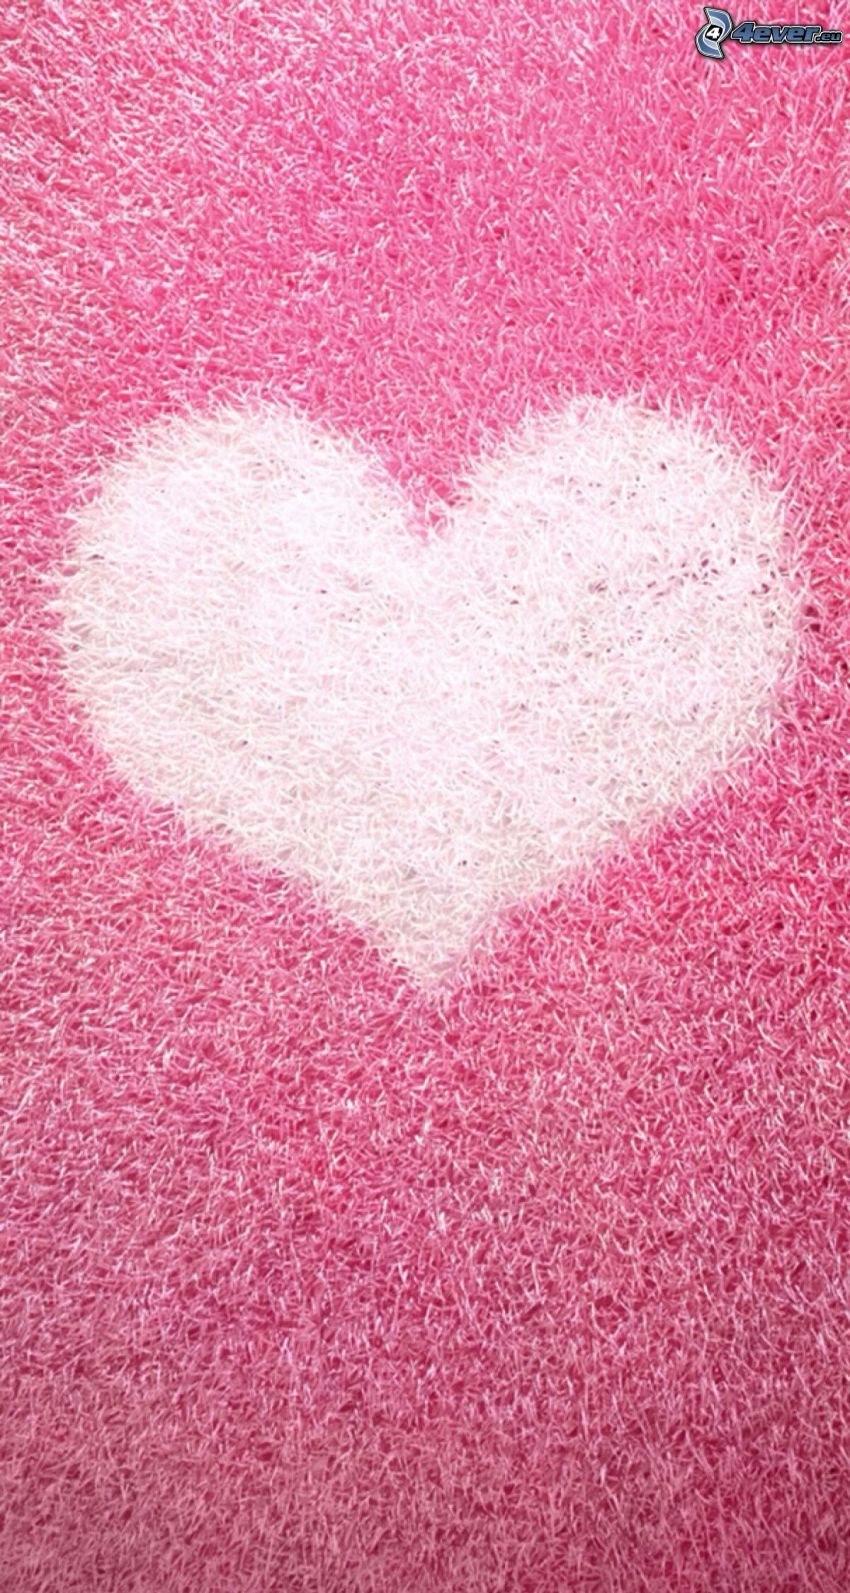 heart, pink background